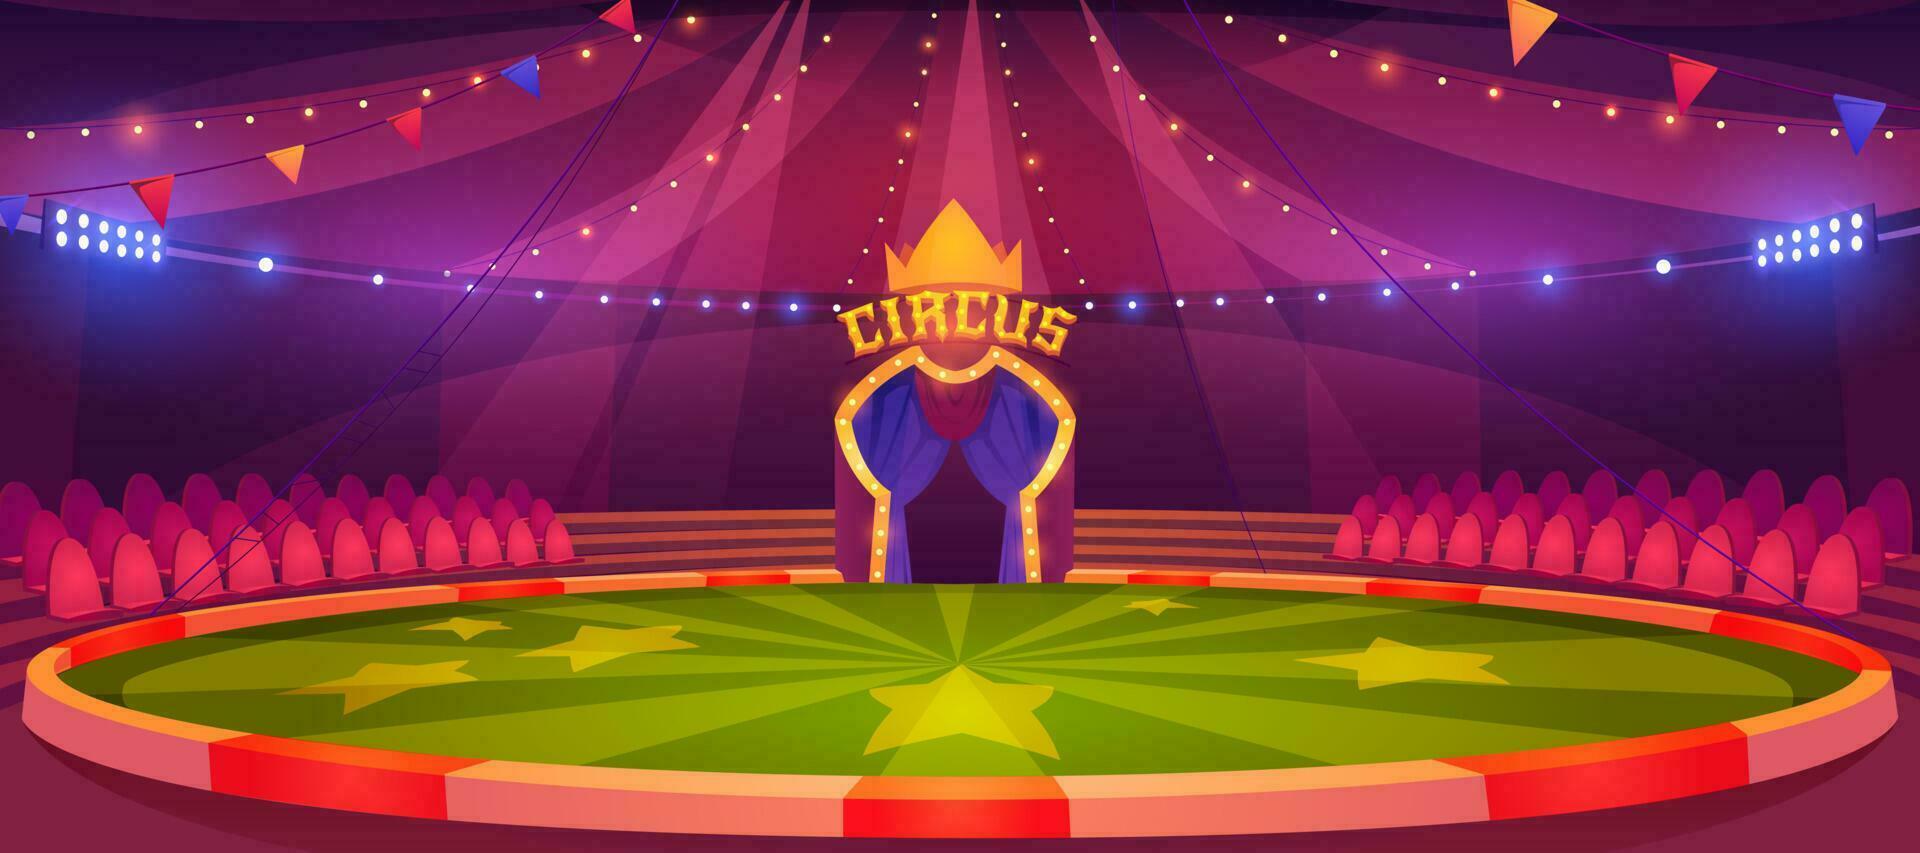 Circus arena, round stage for performance vector